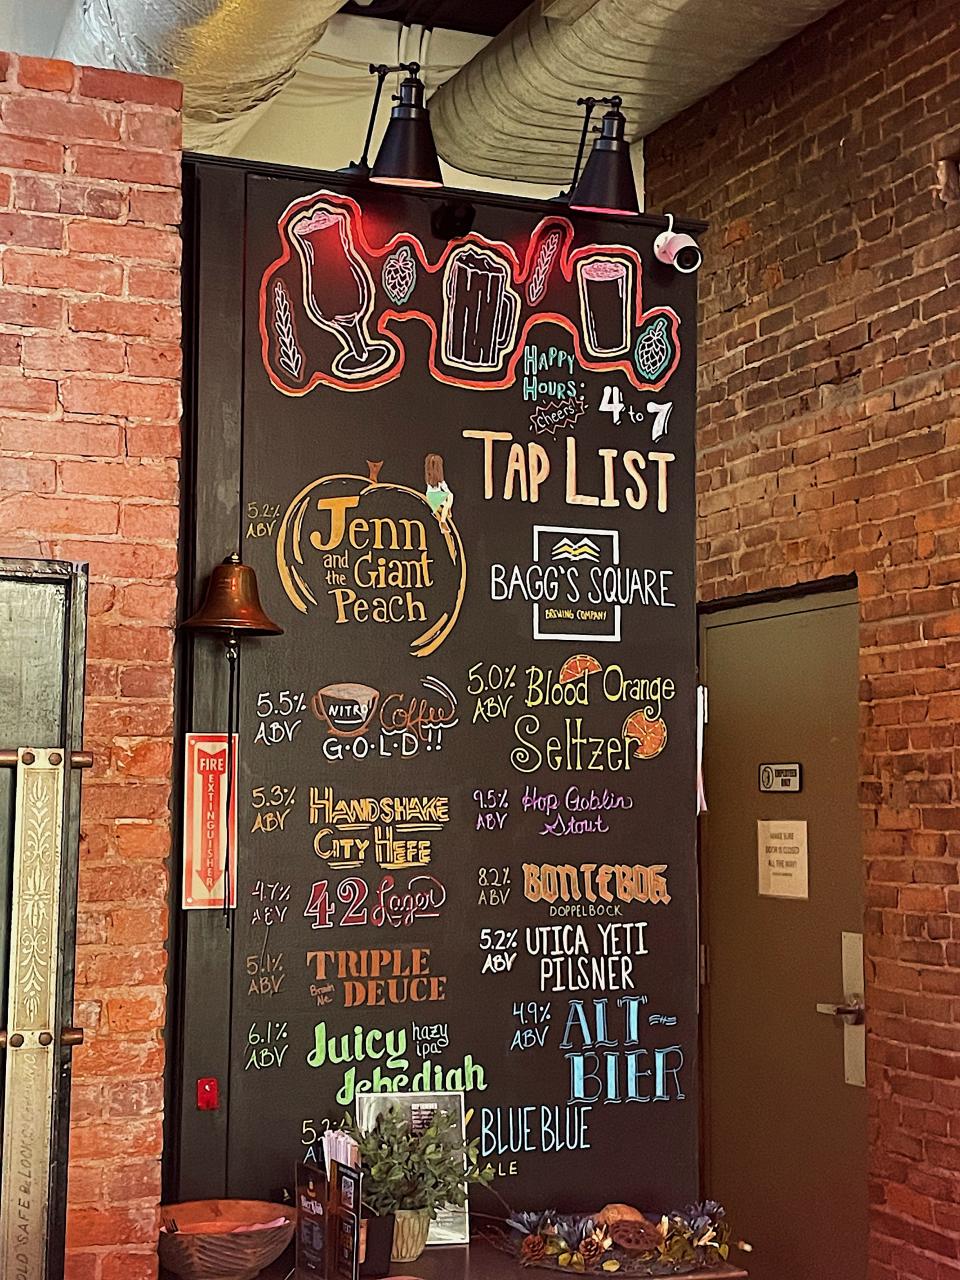 A list of Bagg's Square Brewing Company's craft beers on tap.